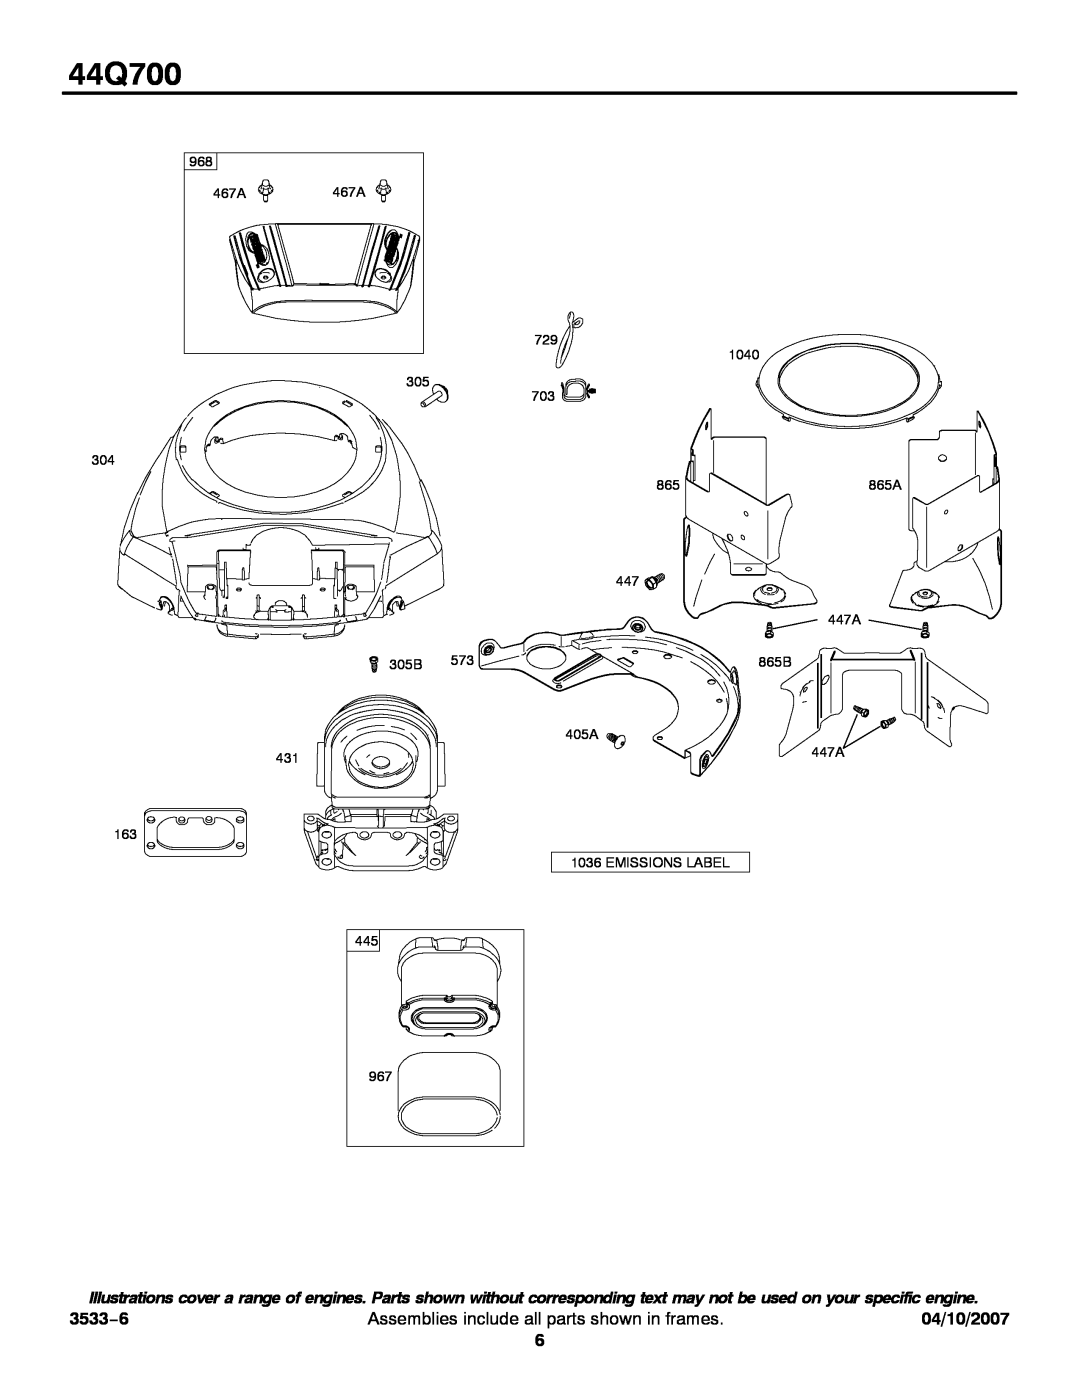 Briggs & Stratton 44Q700 service manual 3533−6, Assemblies include all parts shown in frames, 04/10/2007, 865A 